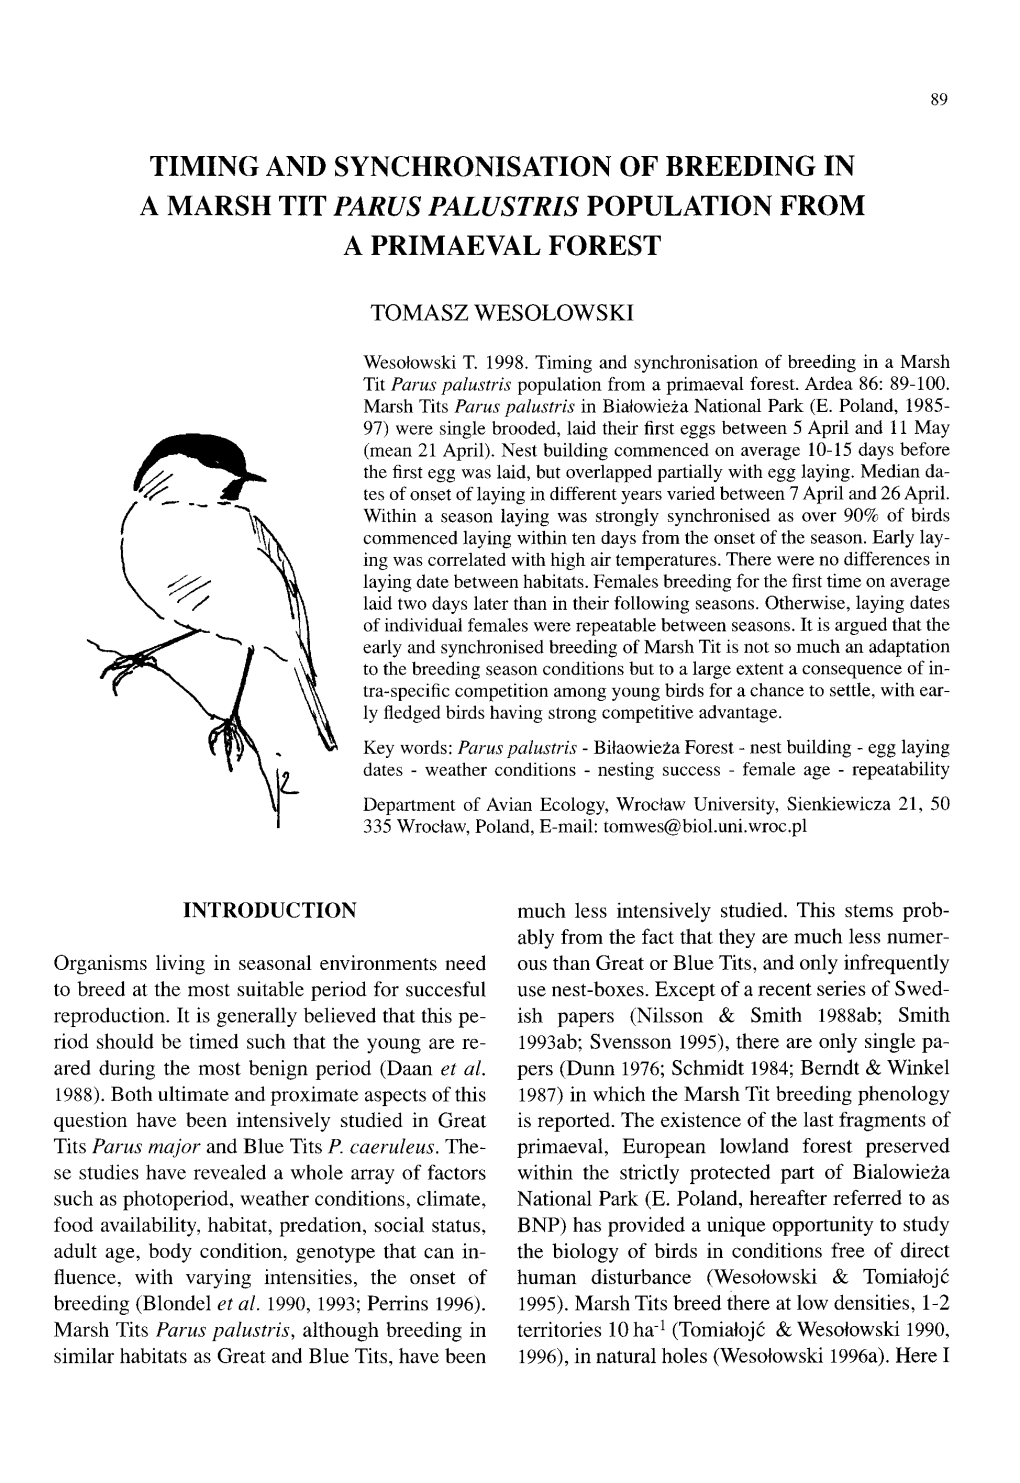 Timing and Synchronisation of Breeding in a Marsh Tit Parus Palustris Population from a Primaeval Forest